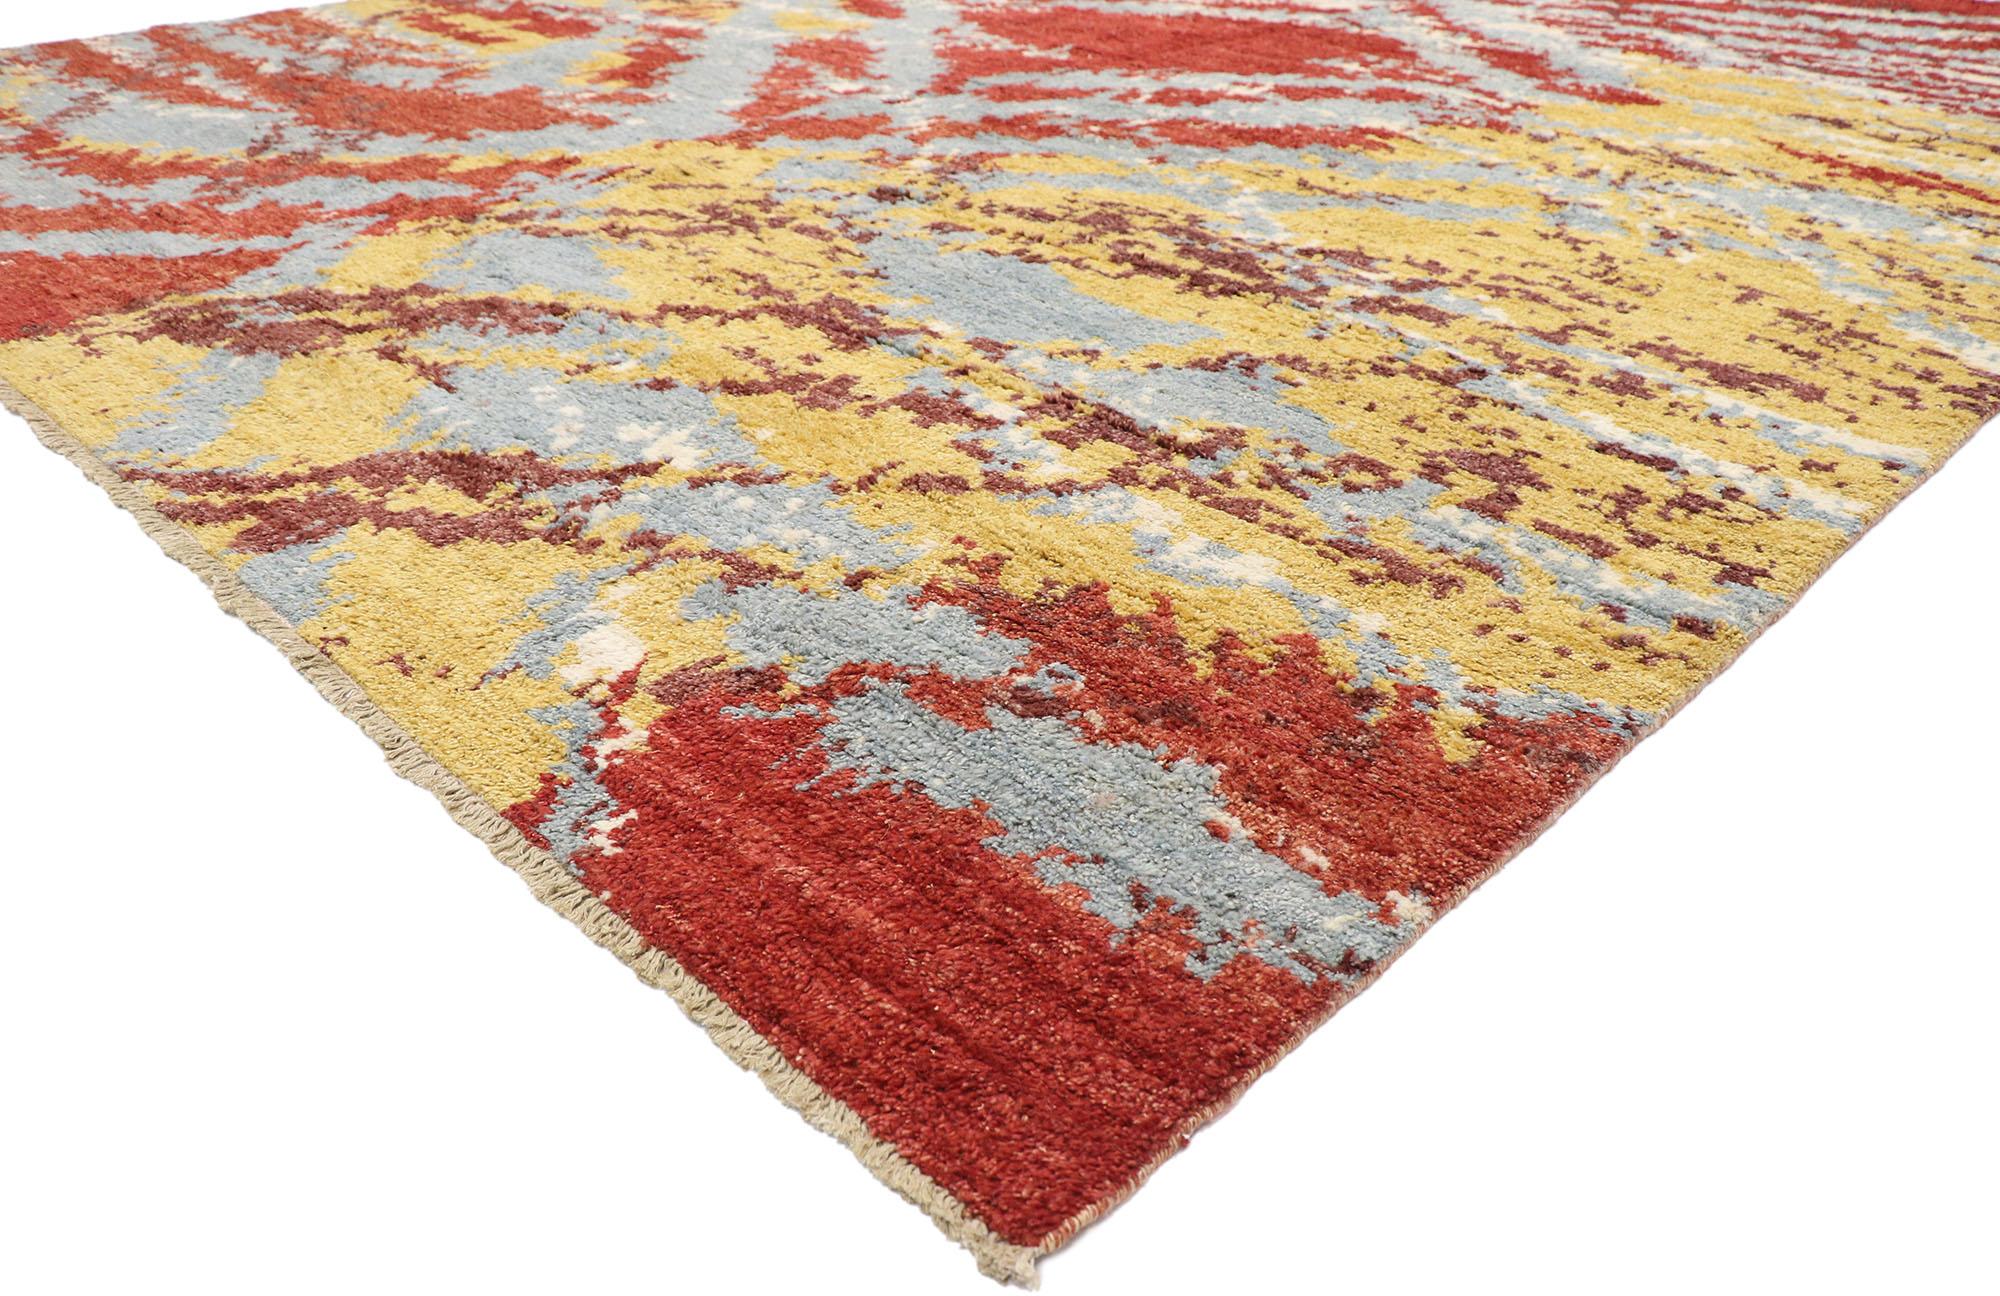 80364, new contemporary Moroccan rug with Abstract Expressionism and Post-Modern style. This hand-knotted wool contemporary Moroccan area rug depicts a Post-Modern and Abstract Expressionism style. The Moroccan rug features an energetic color